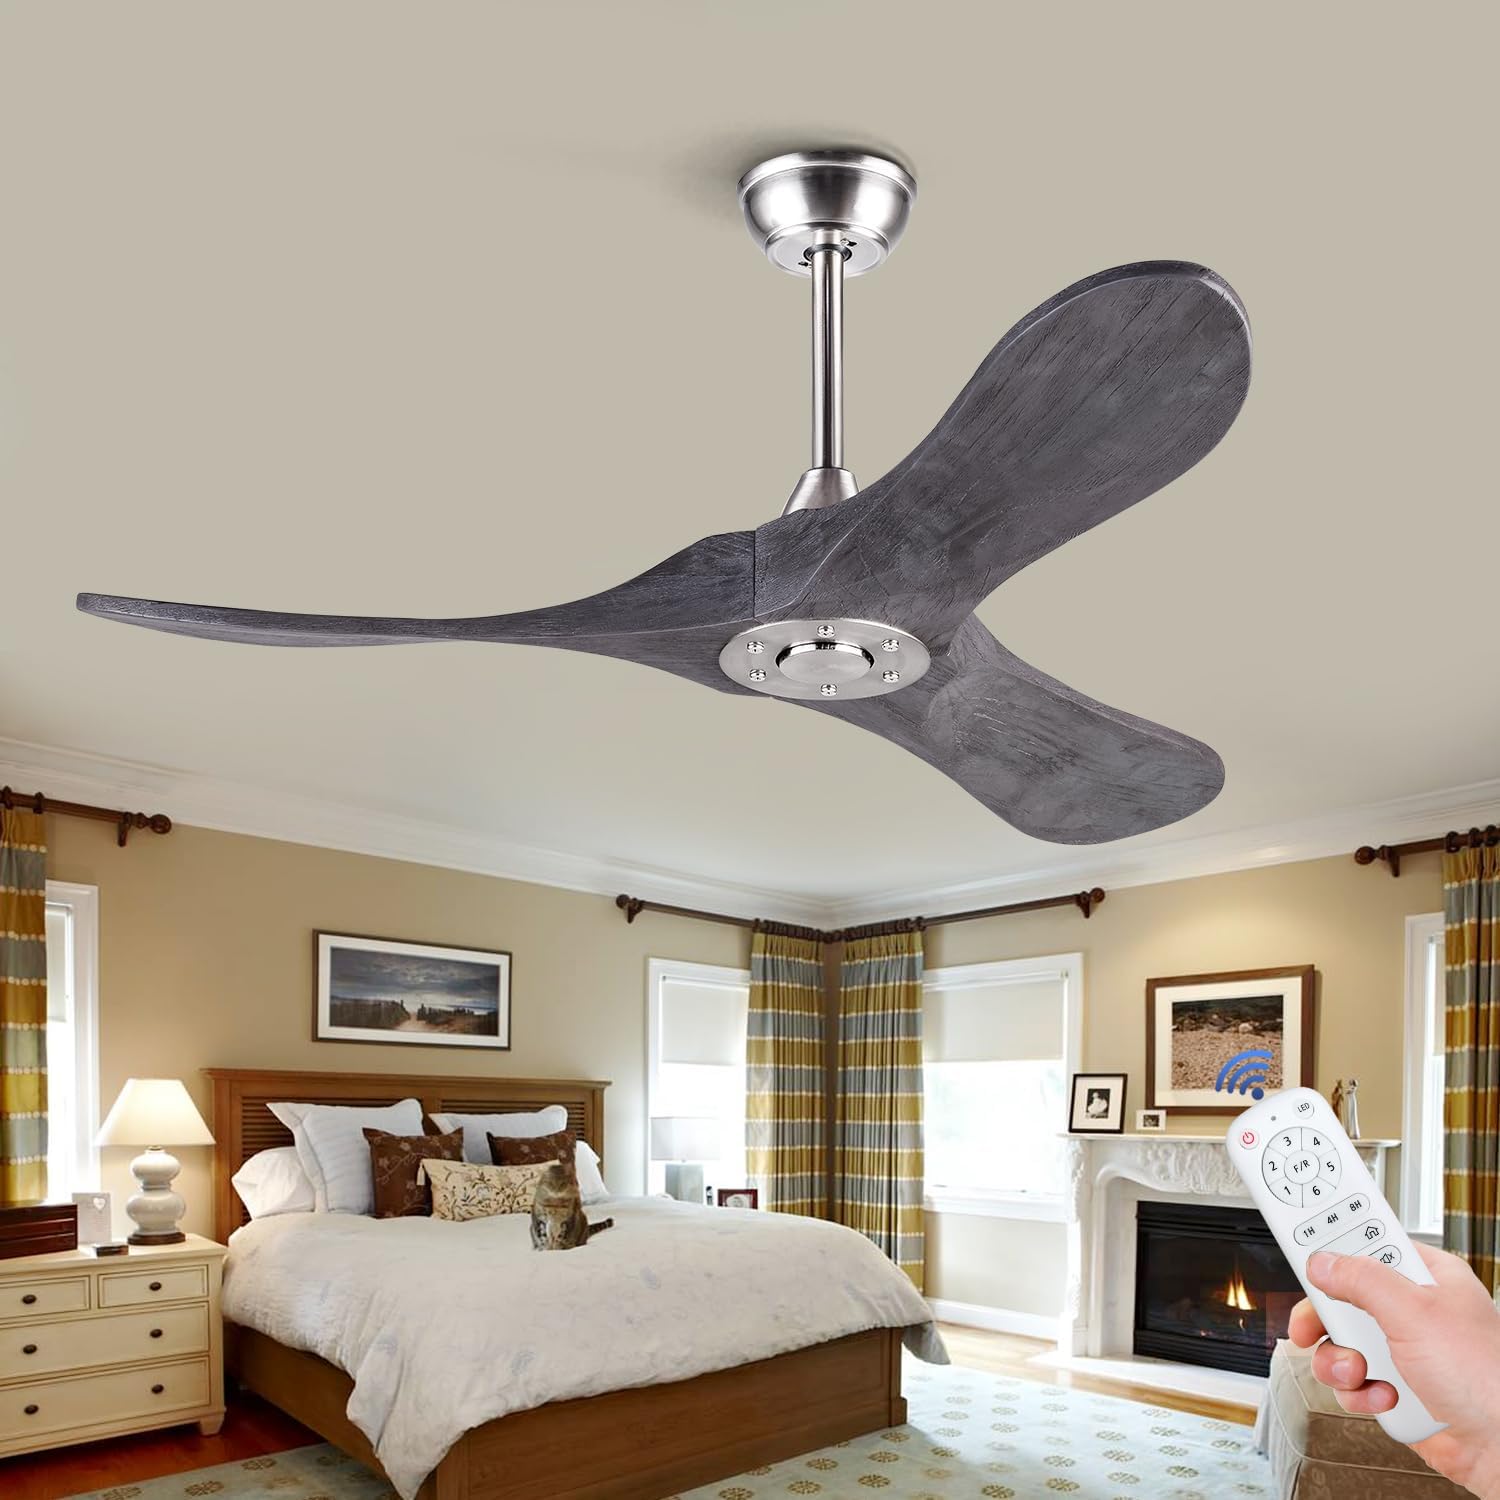 BOJUE 42 Wood Ceiling Fan Without Light Remote Control, Low Profile Ceiling Fan Indoor Outdoor with 3 blade for Patio Living Room, Bedroom, Office, Summer House, Etc (Gray Drawing Lines Blades)